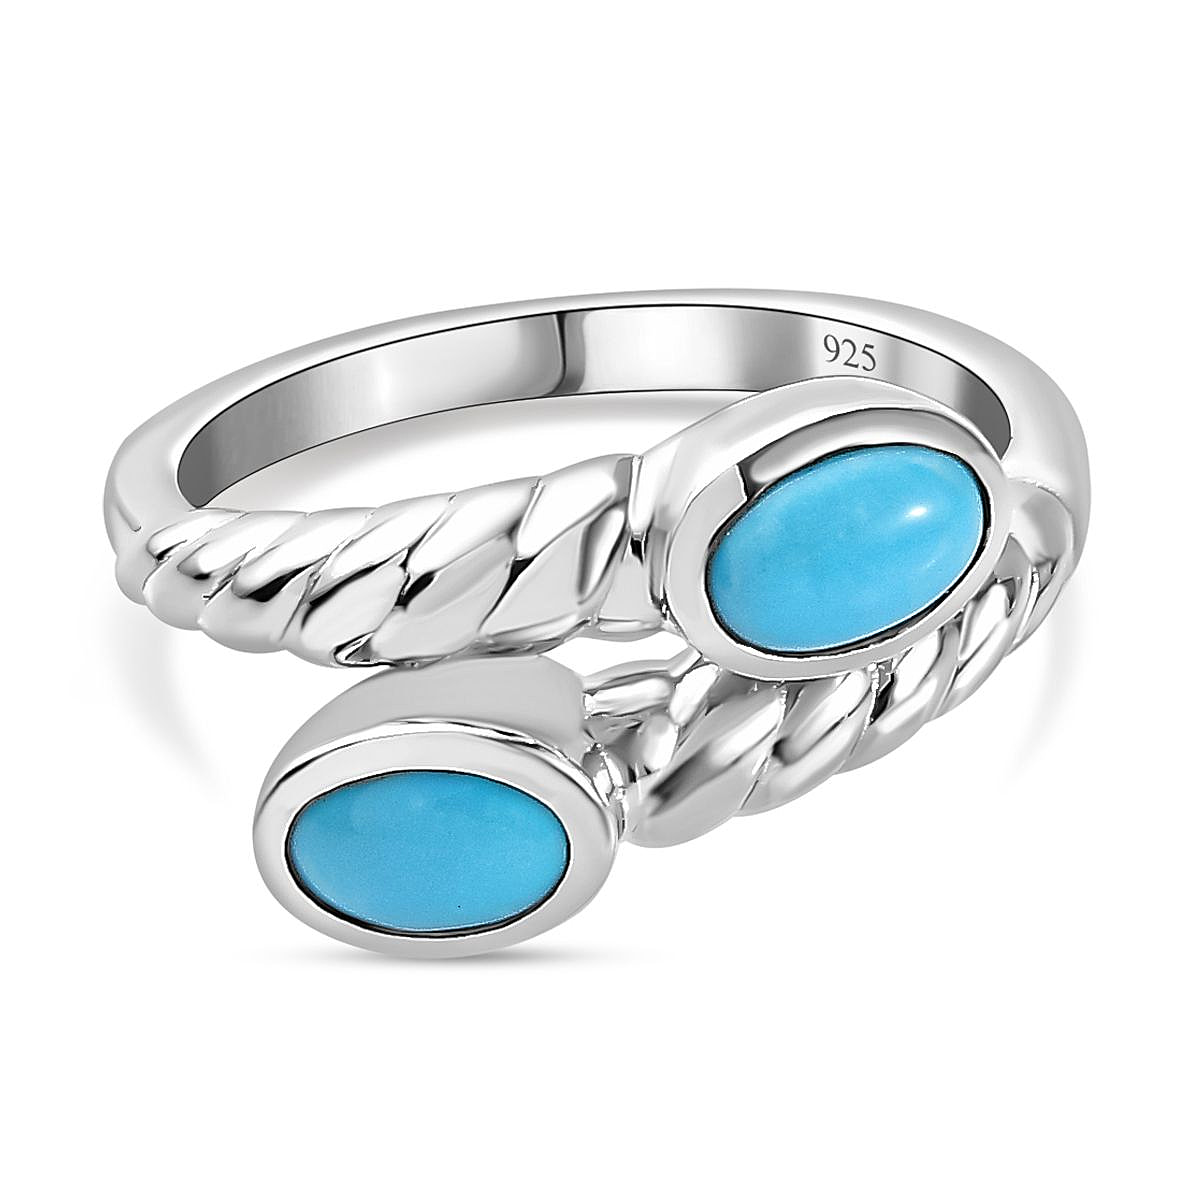 Arizona Sleeping Beauty Turquoise Bypass Ring in Platinum Overlay Sterling Silver